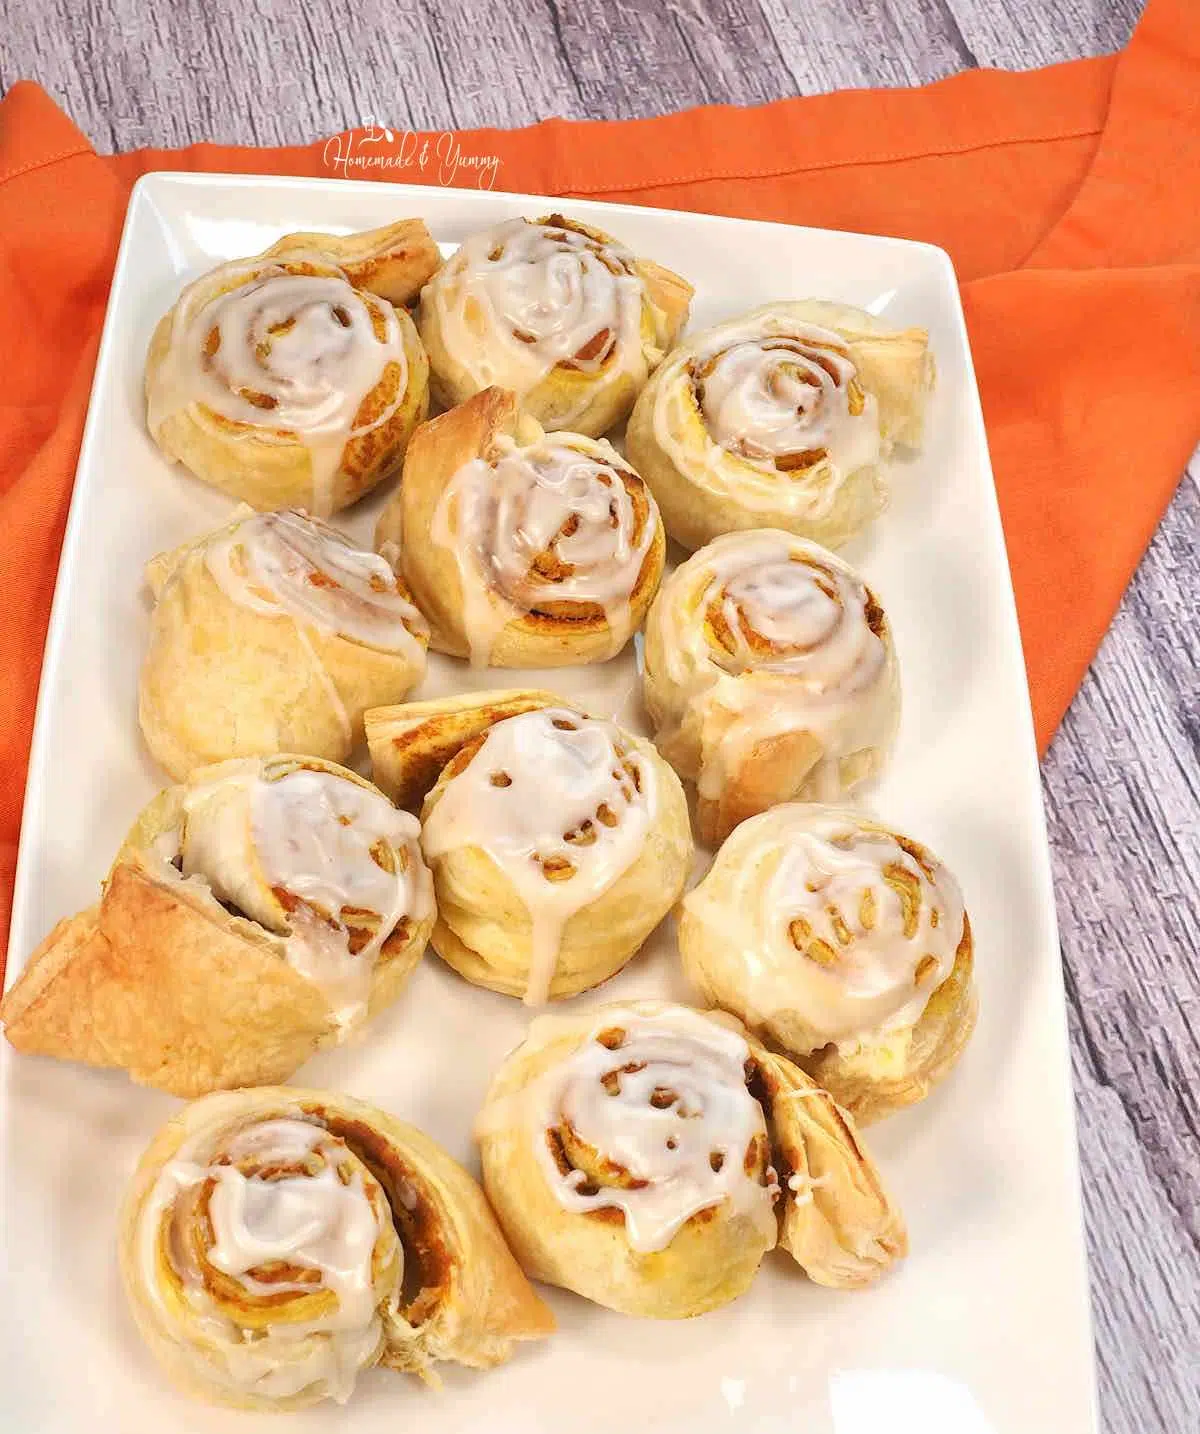 A plate of fresh baked and glazed pumpkin sweet rolls.